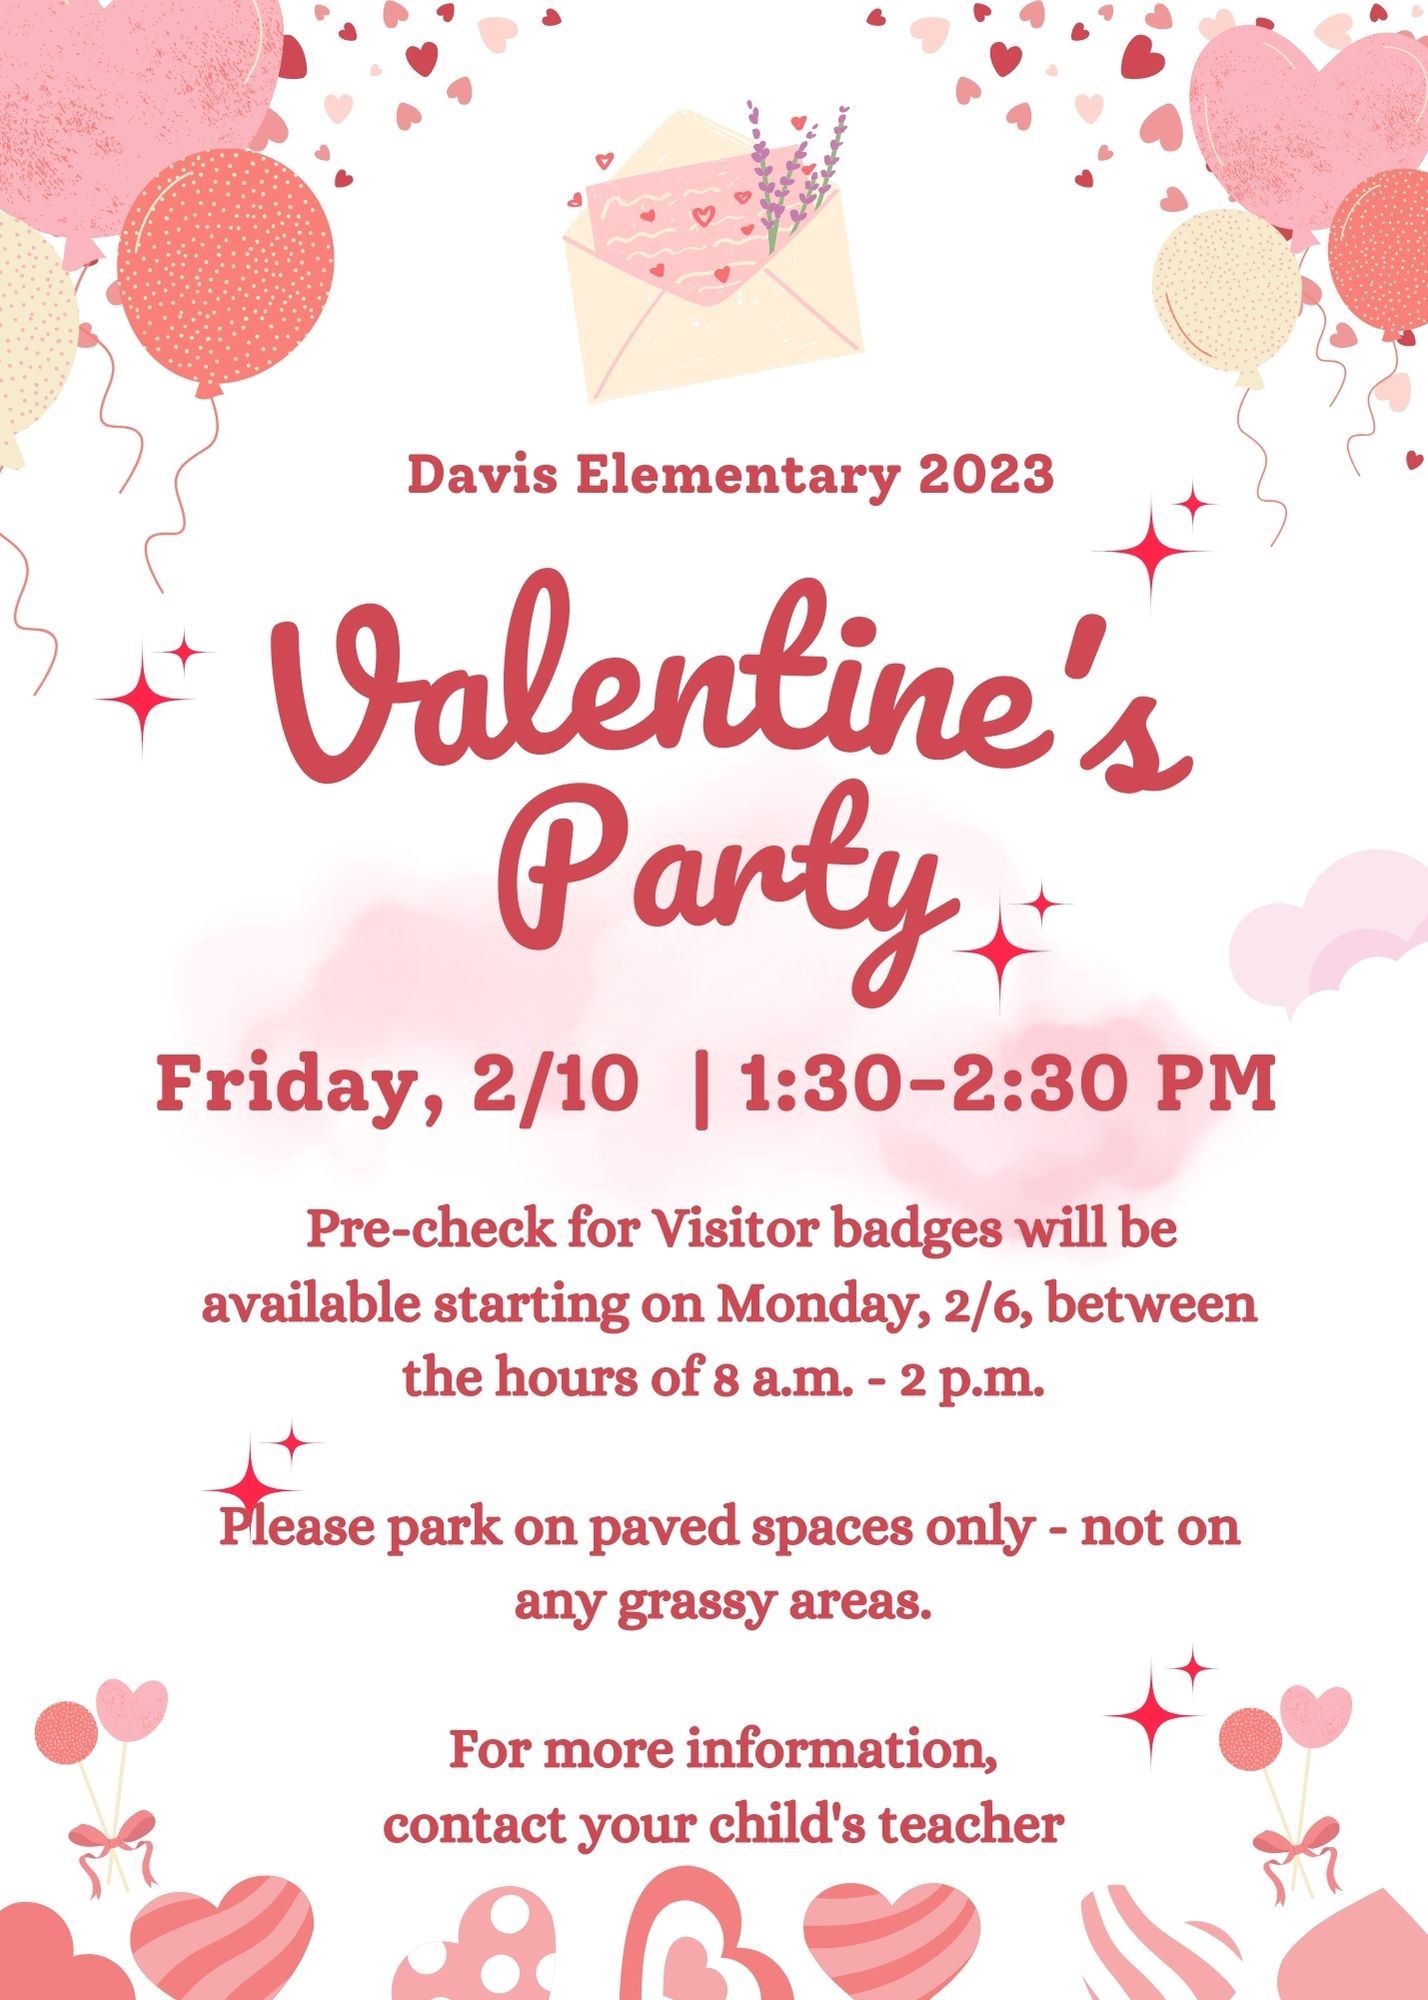  Valentine's party Friday the 10th